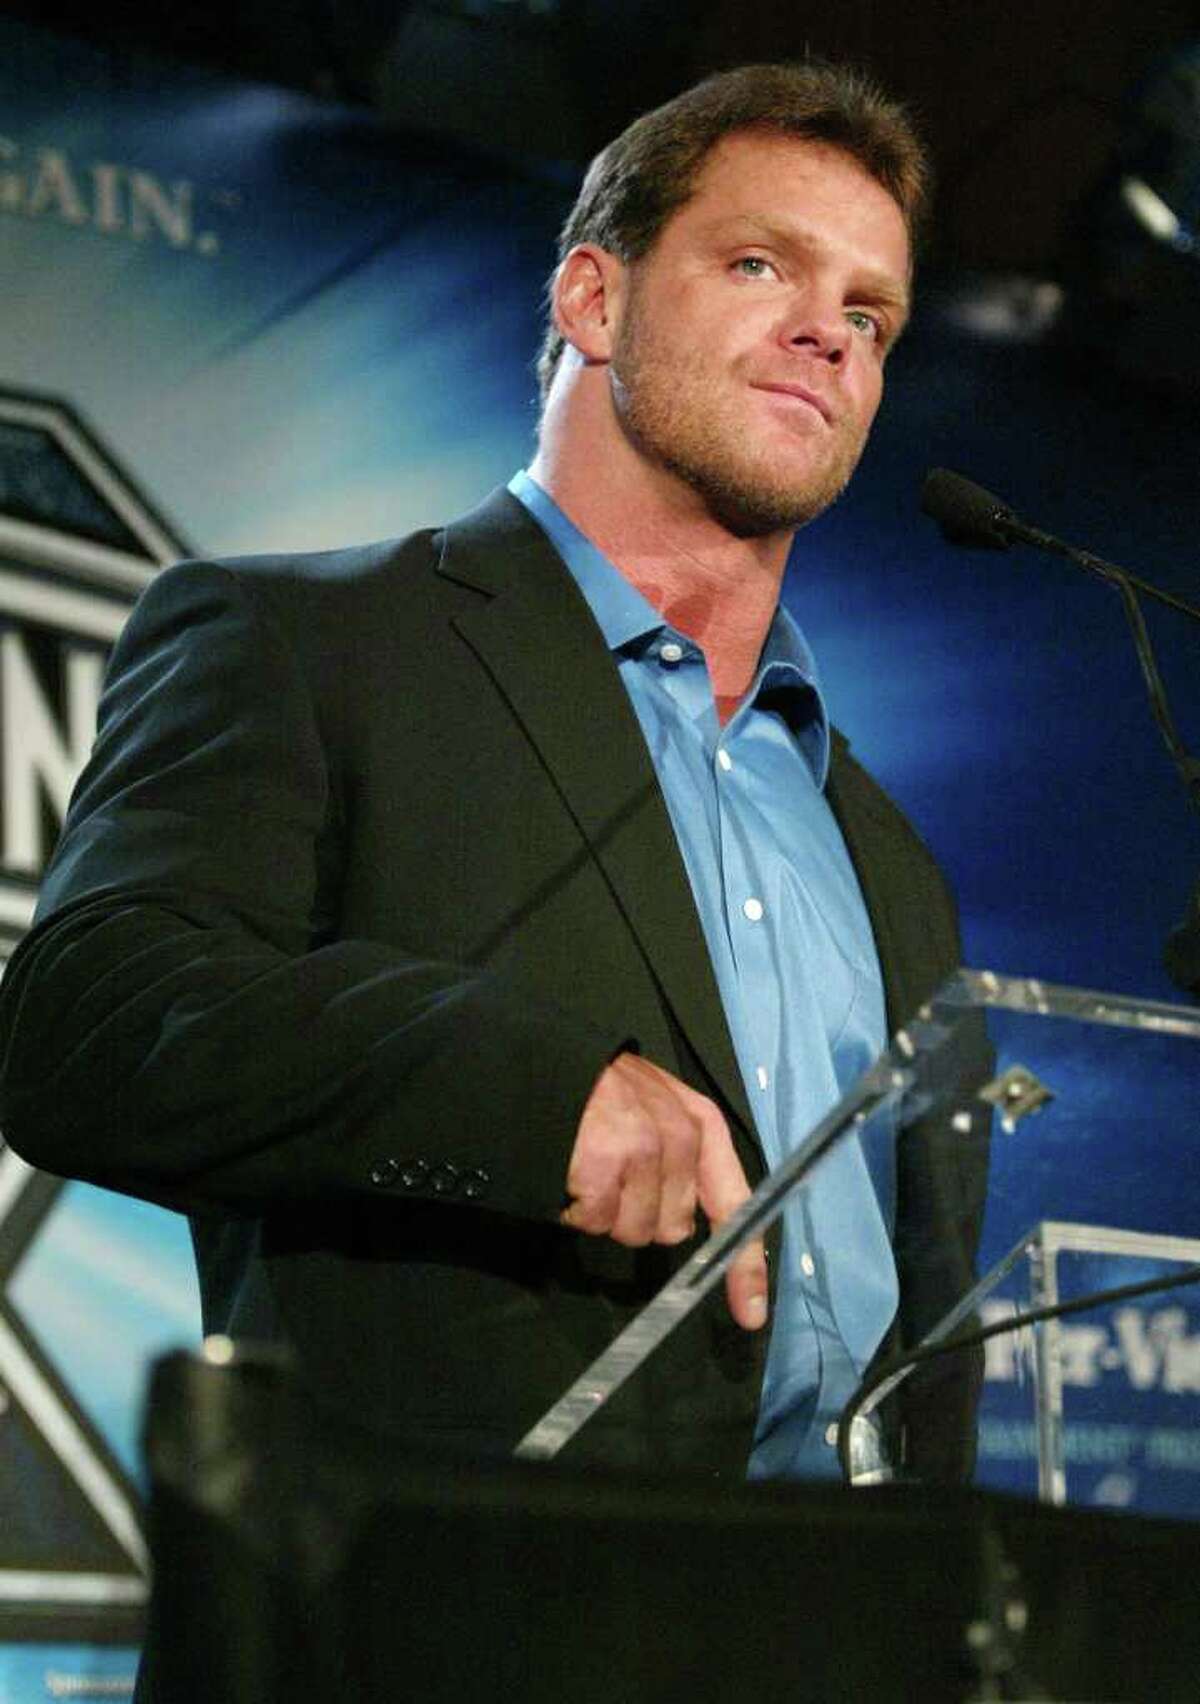 Wrestler Chris Benoit attends a press conference to promote Wrestlemania XX at Planet Hollywood March 11, 2004 in New York City. Benoit, his wife Nancy and their son Daniel, 7-years-old, were found dead June 25, 2007 at their home in Georgia.